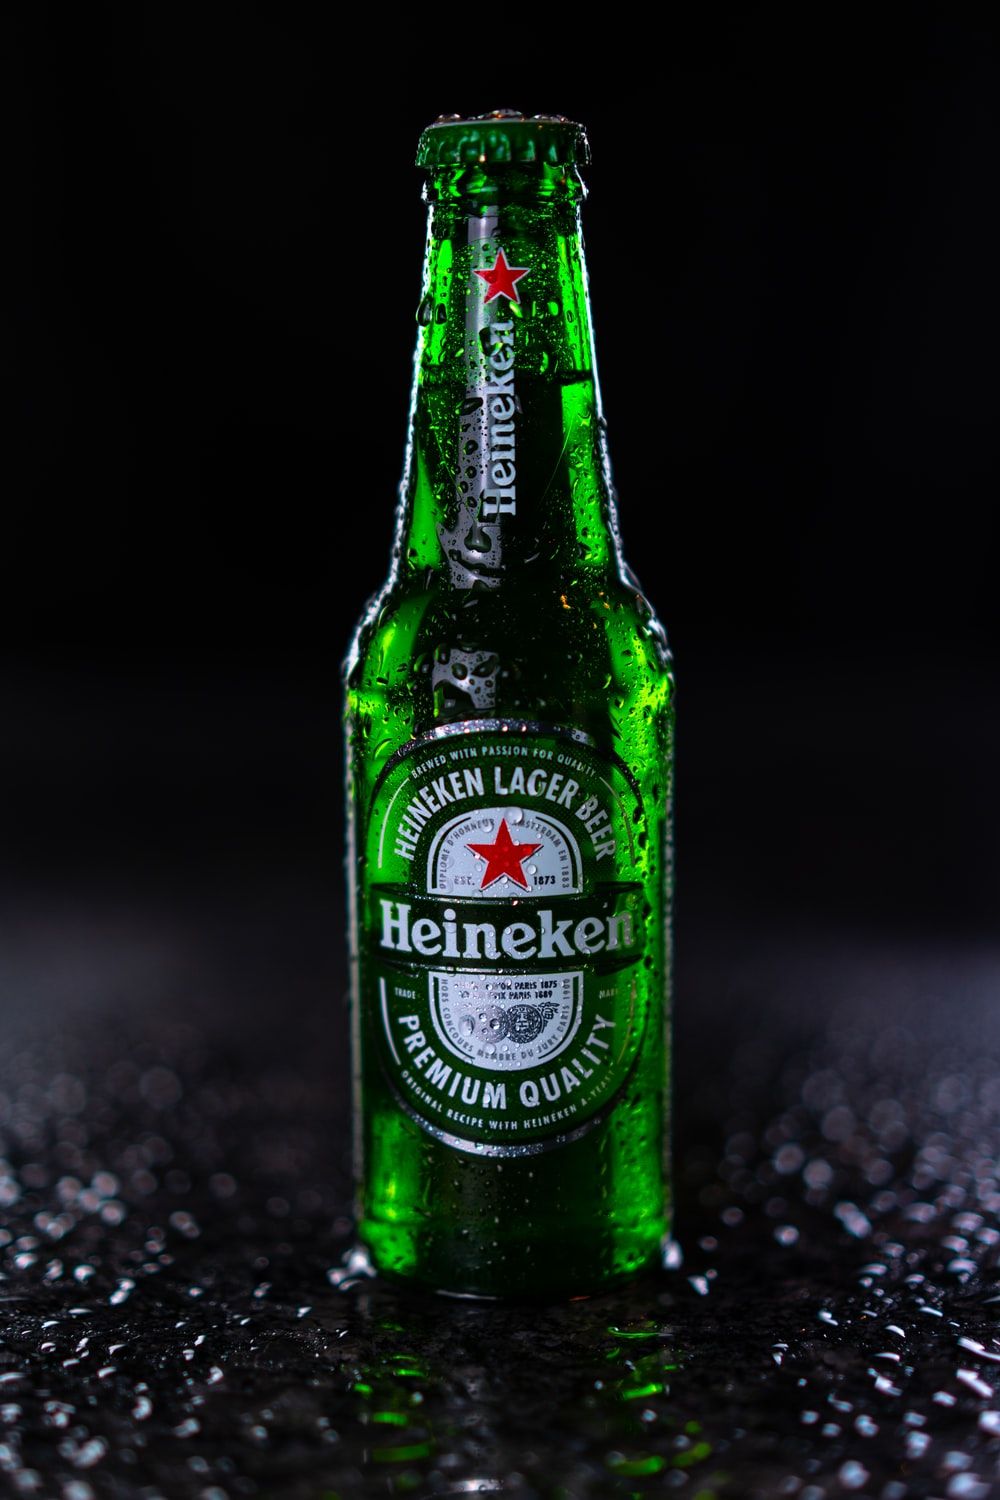 [HQ] Beer Bottle Picture. Download Free Image